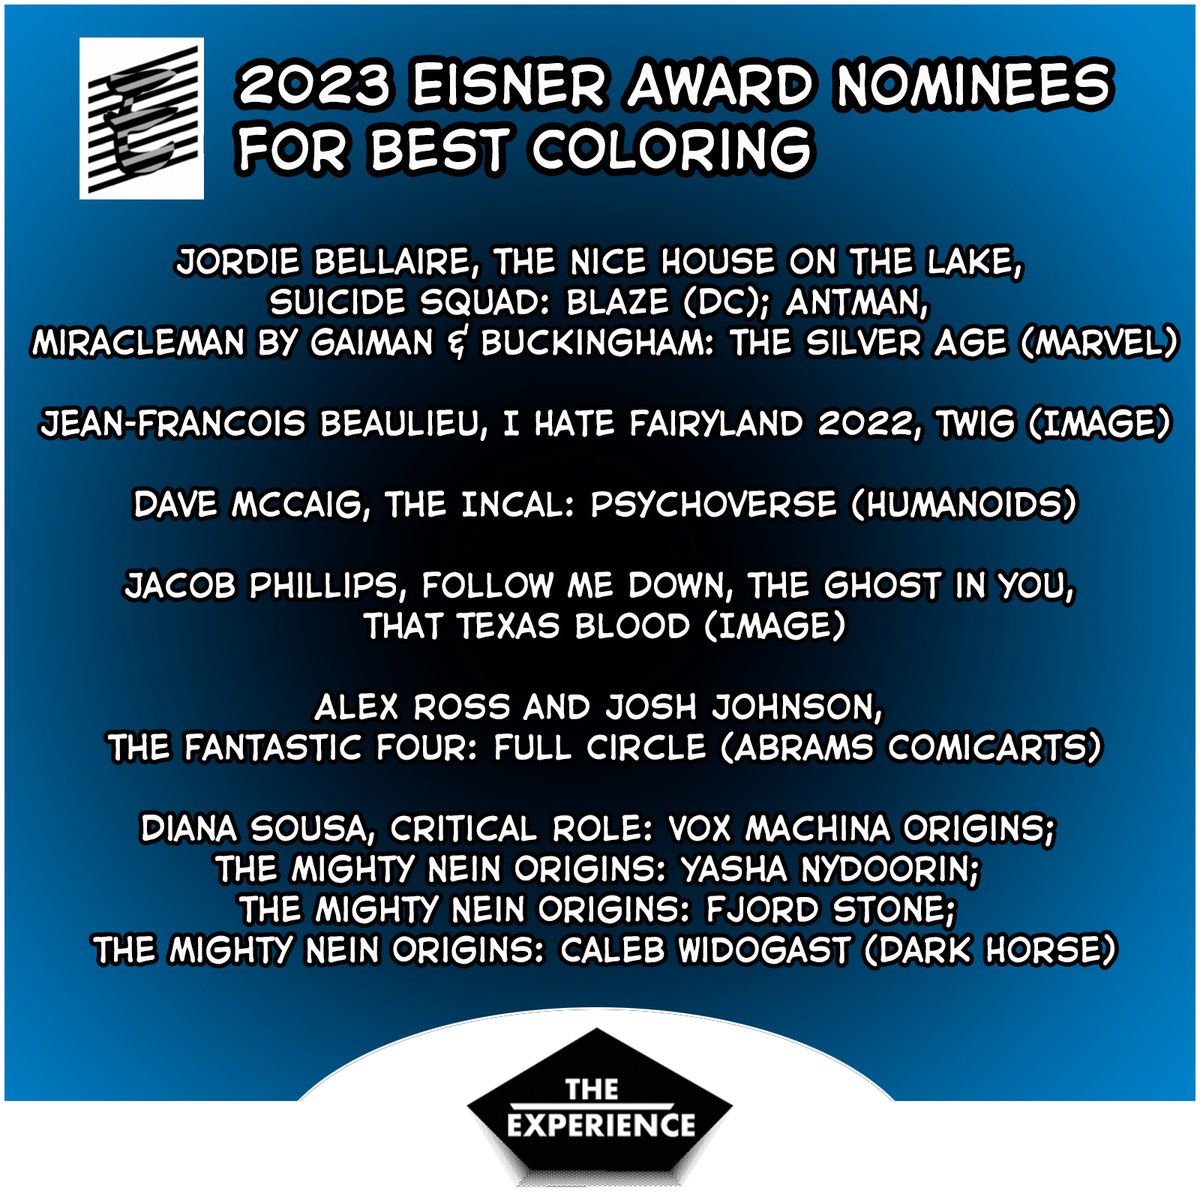 Congratulations to the  Eisner Awards Nominees 2023 for Best Coloring